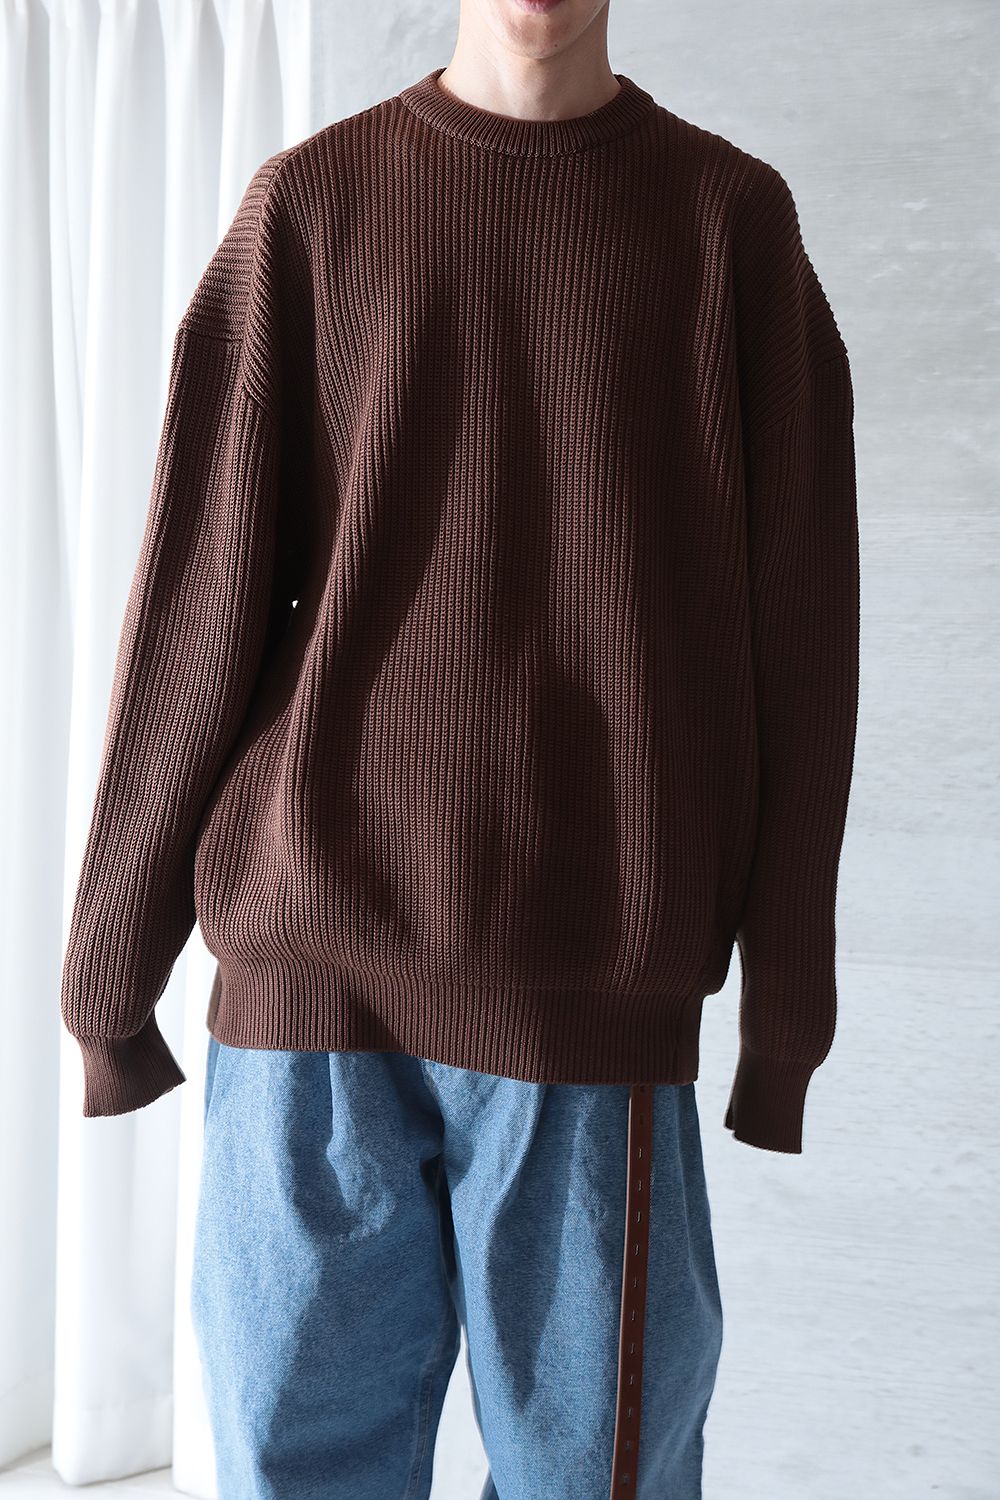 HED MAYNER - 【ラスト1点】TWISTED LONG SLEEVES SWEATER(TOBACCO